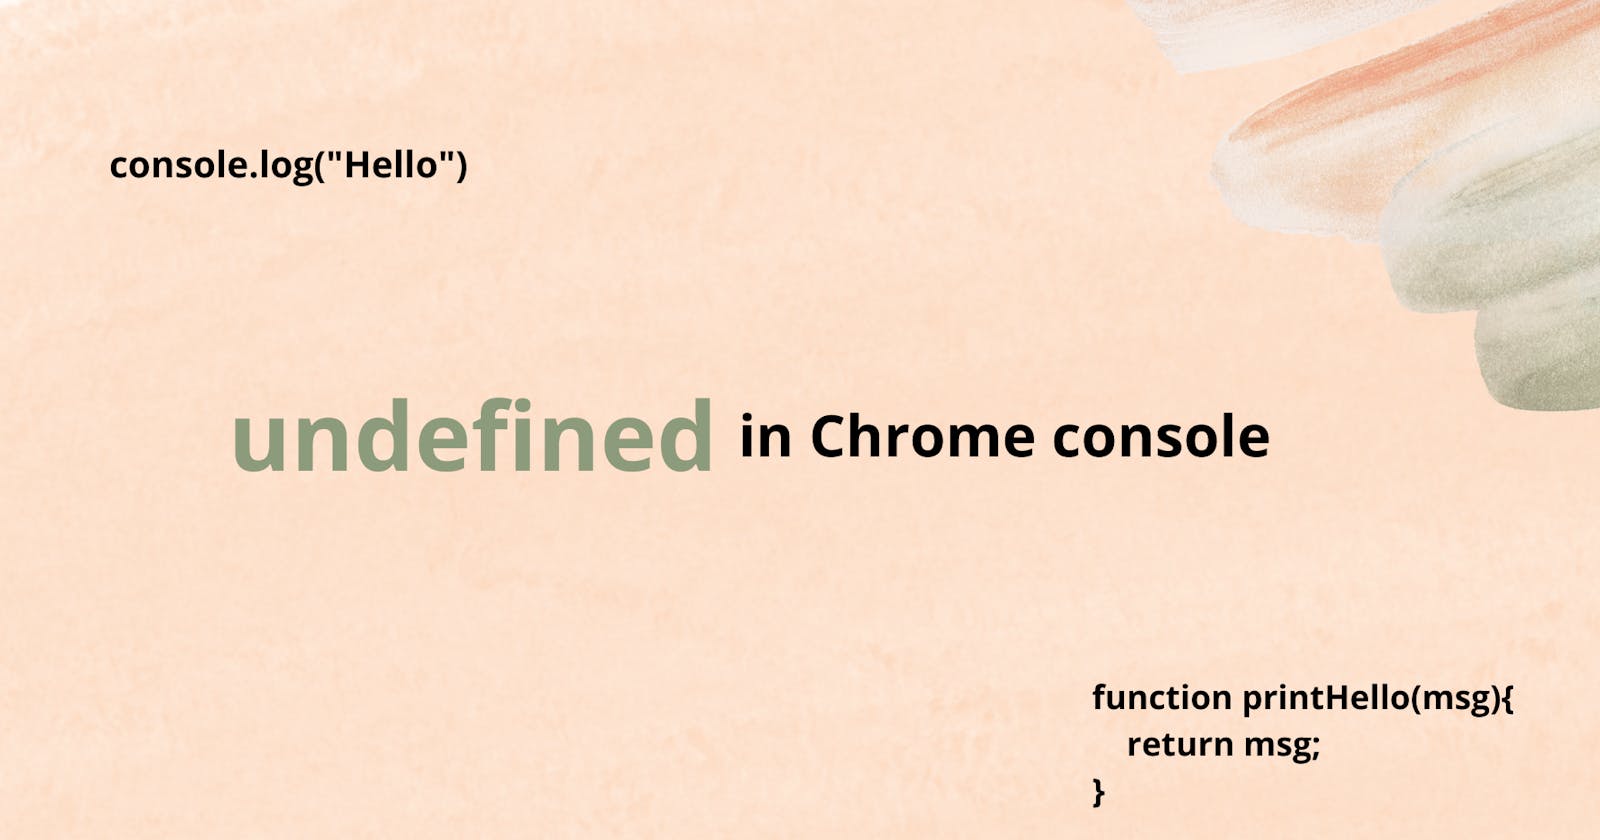 Why does Chrome console.log always append a line saying 'undefined'?